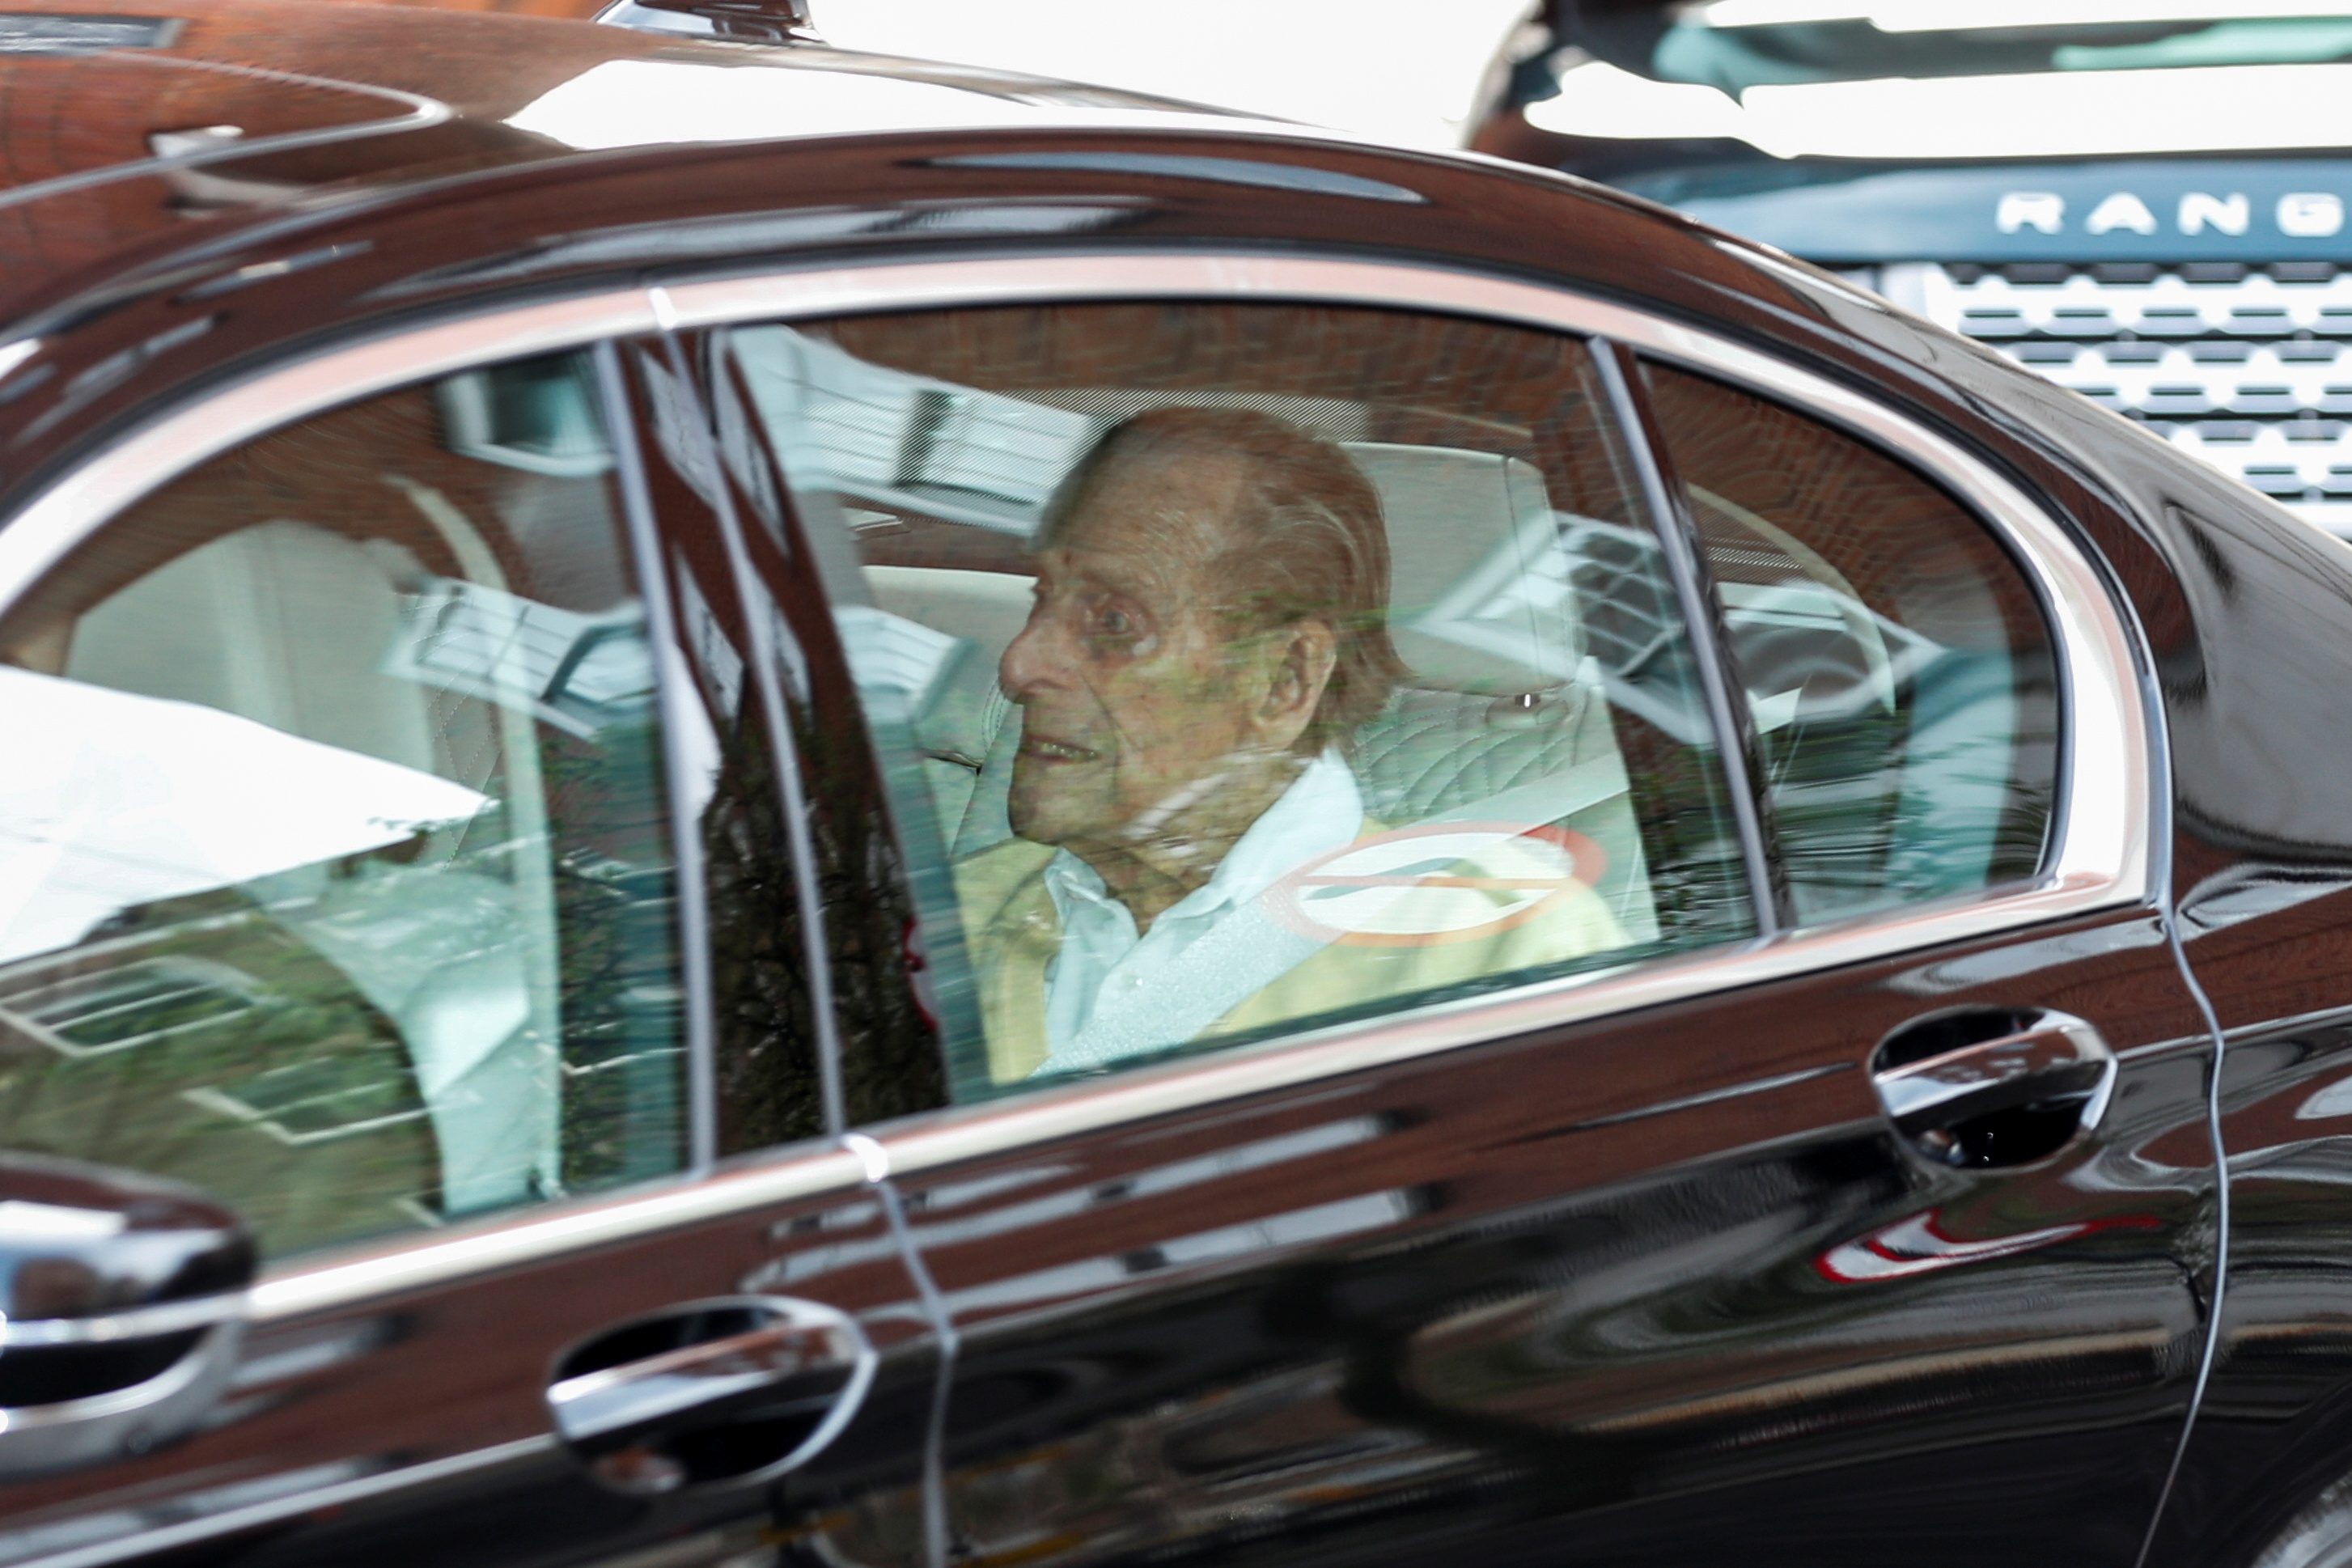 UK’s Prince Philip, 99, leaves hospital after 4-week stay